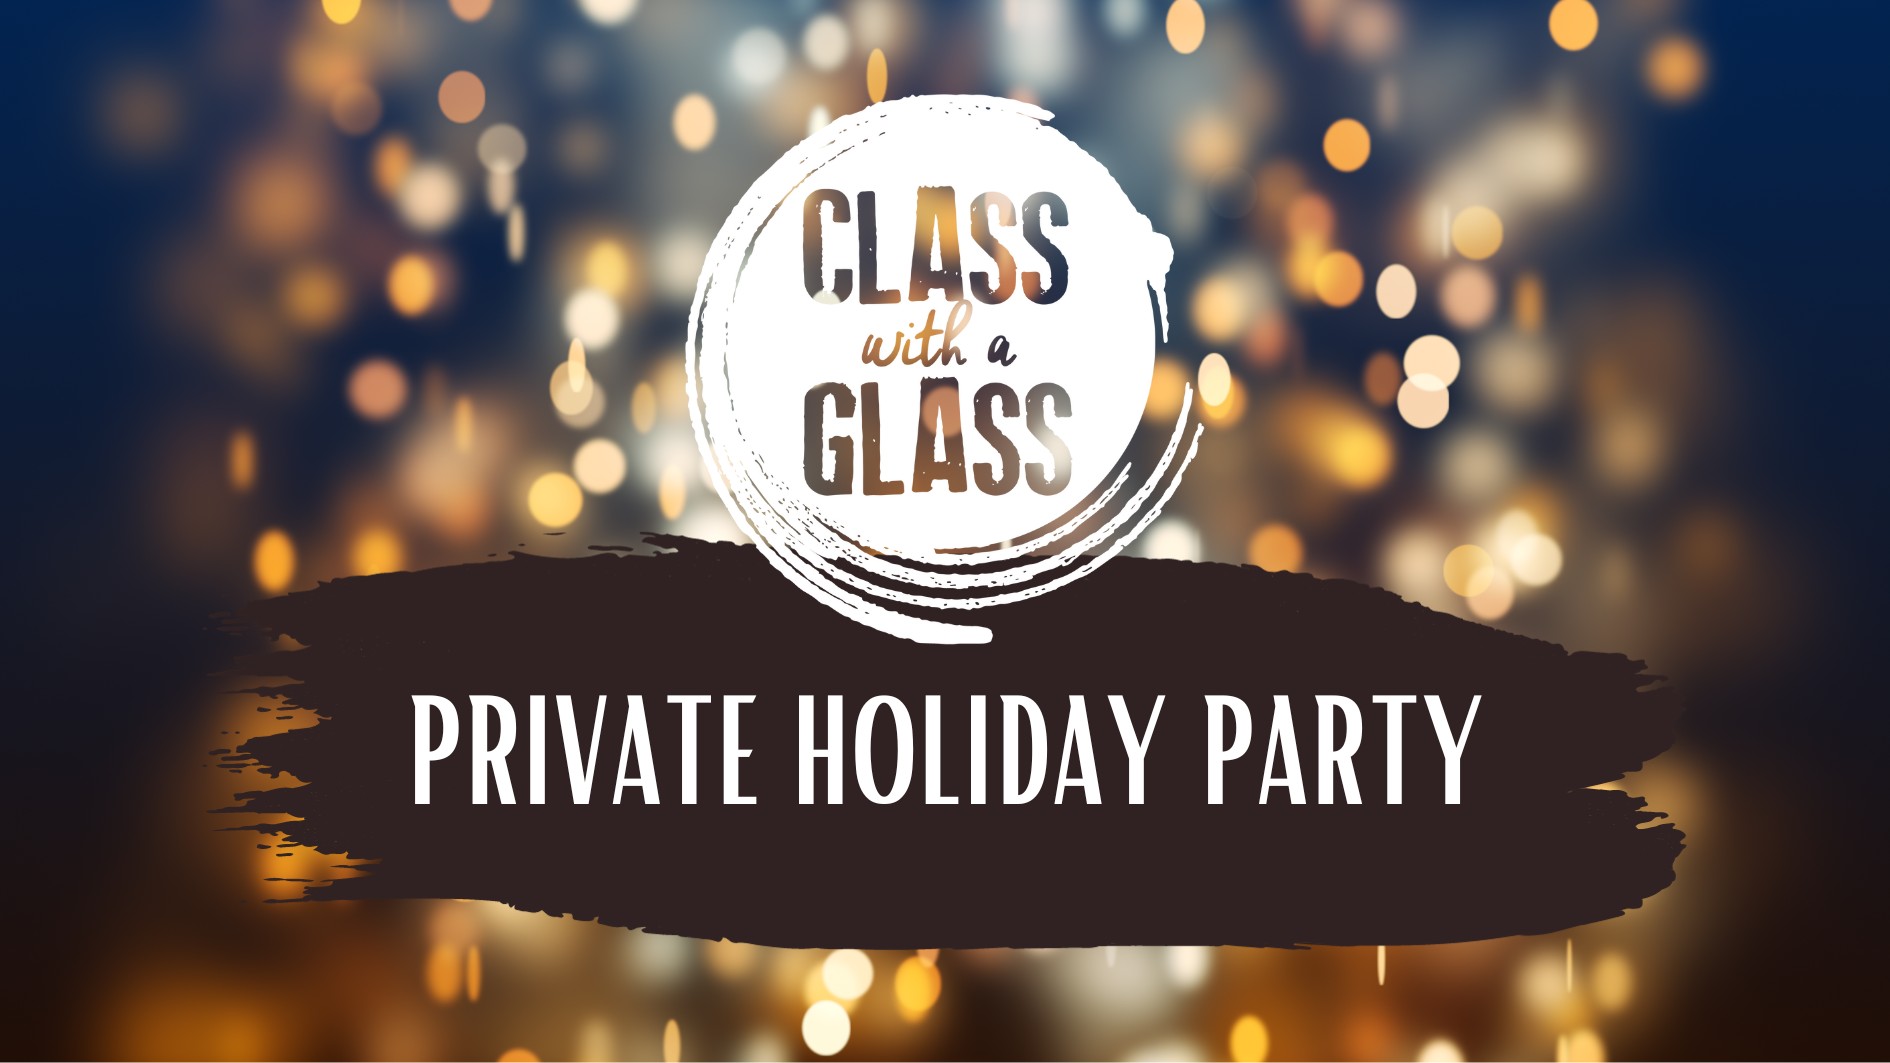 Private Holiday Party place holder